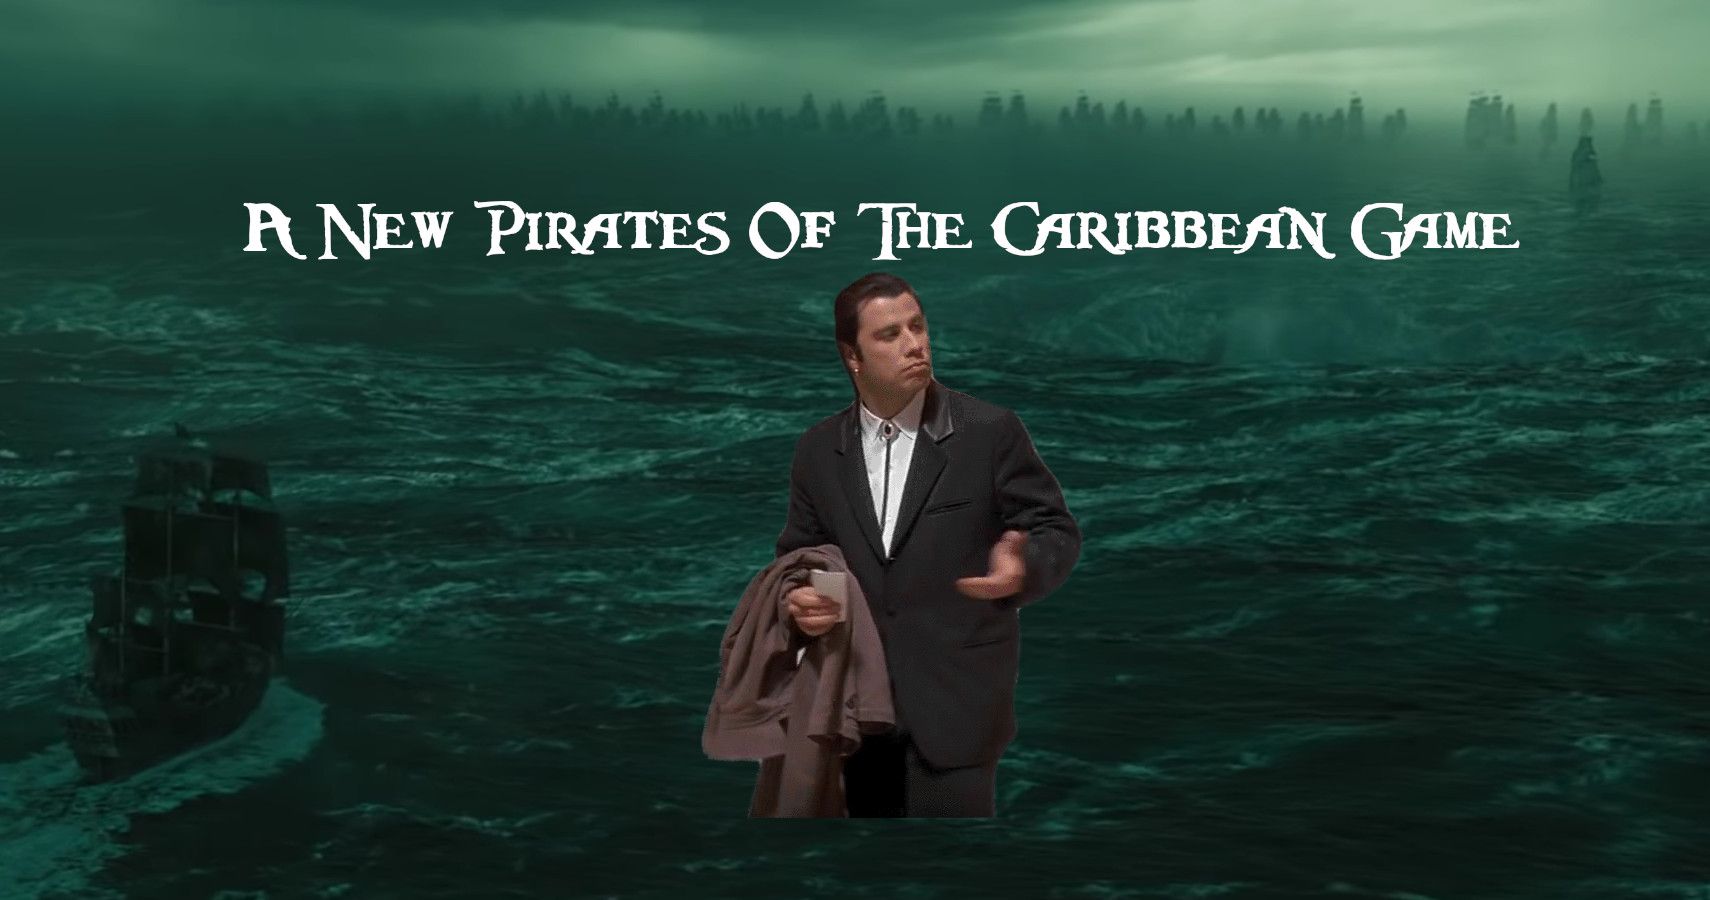 john travolta where meme in the middle of a maelstrom